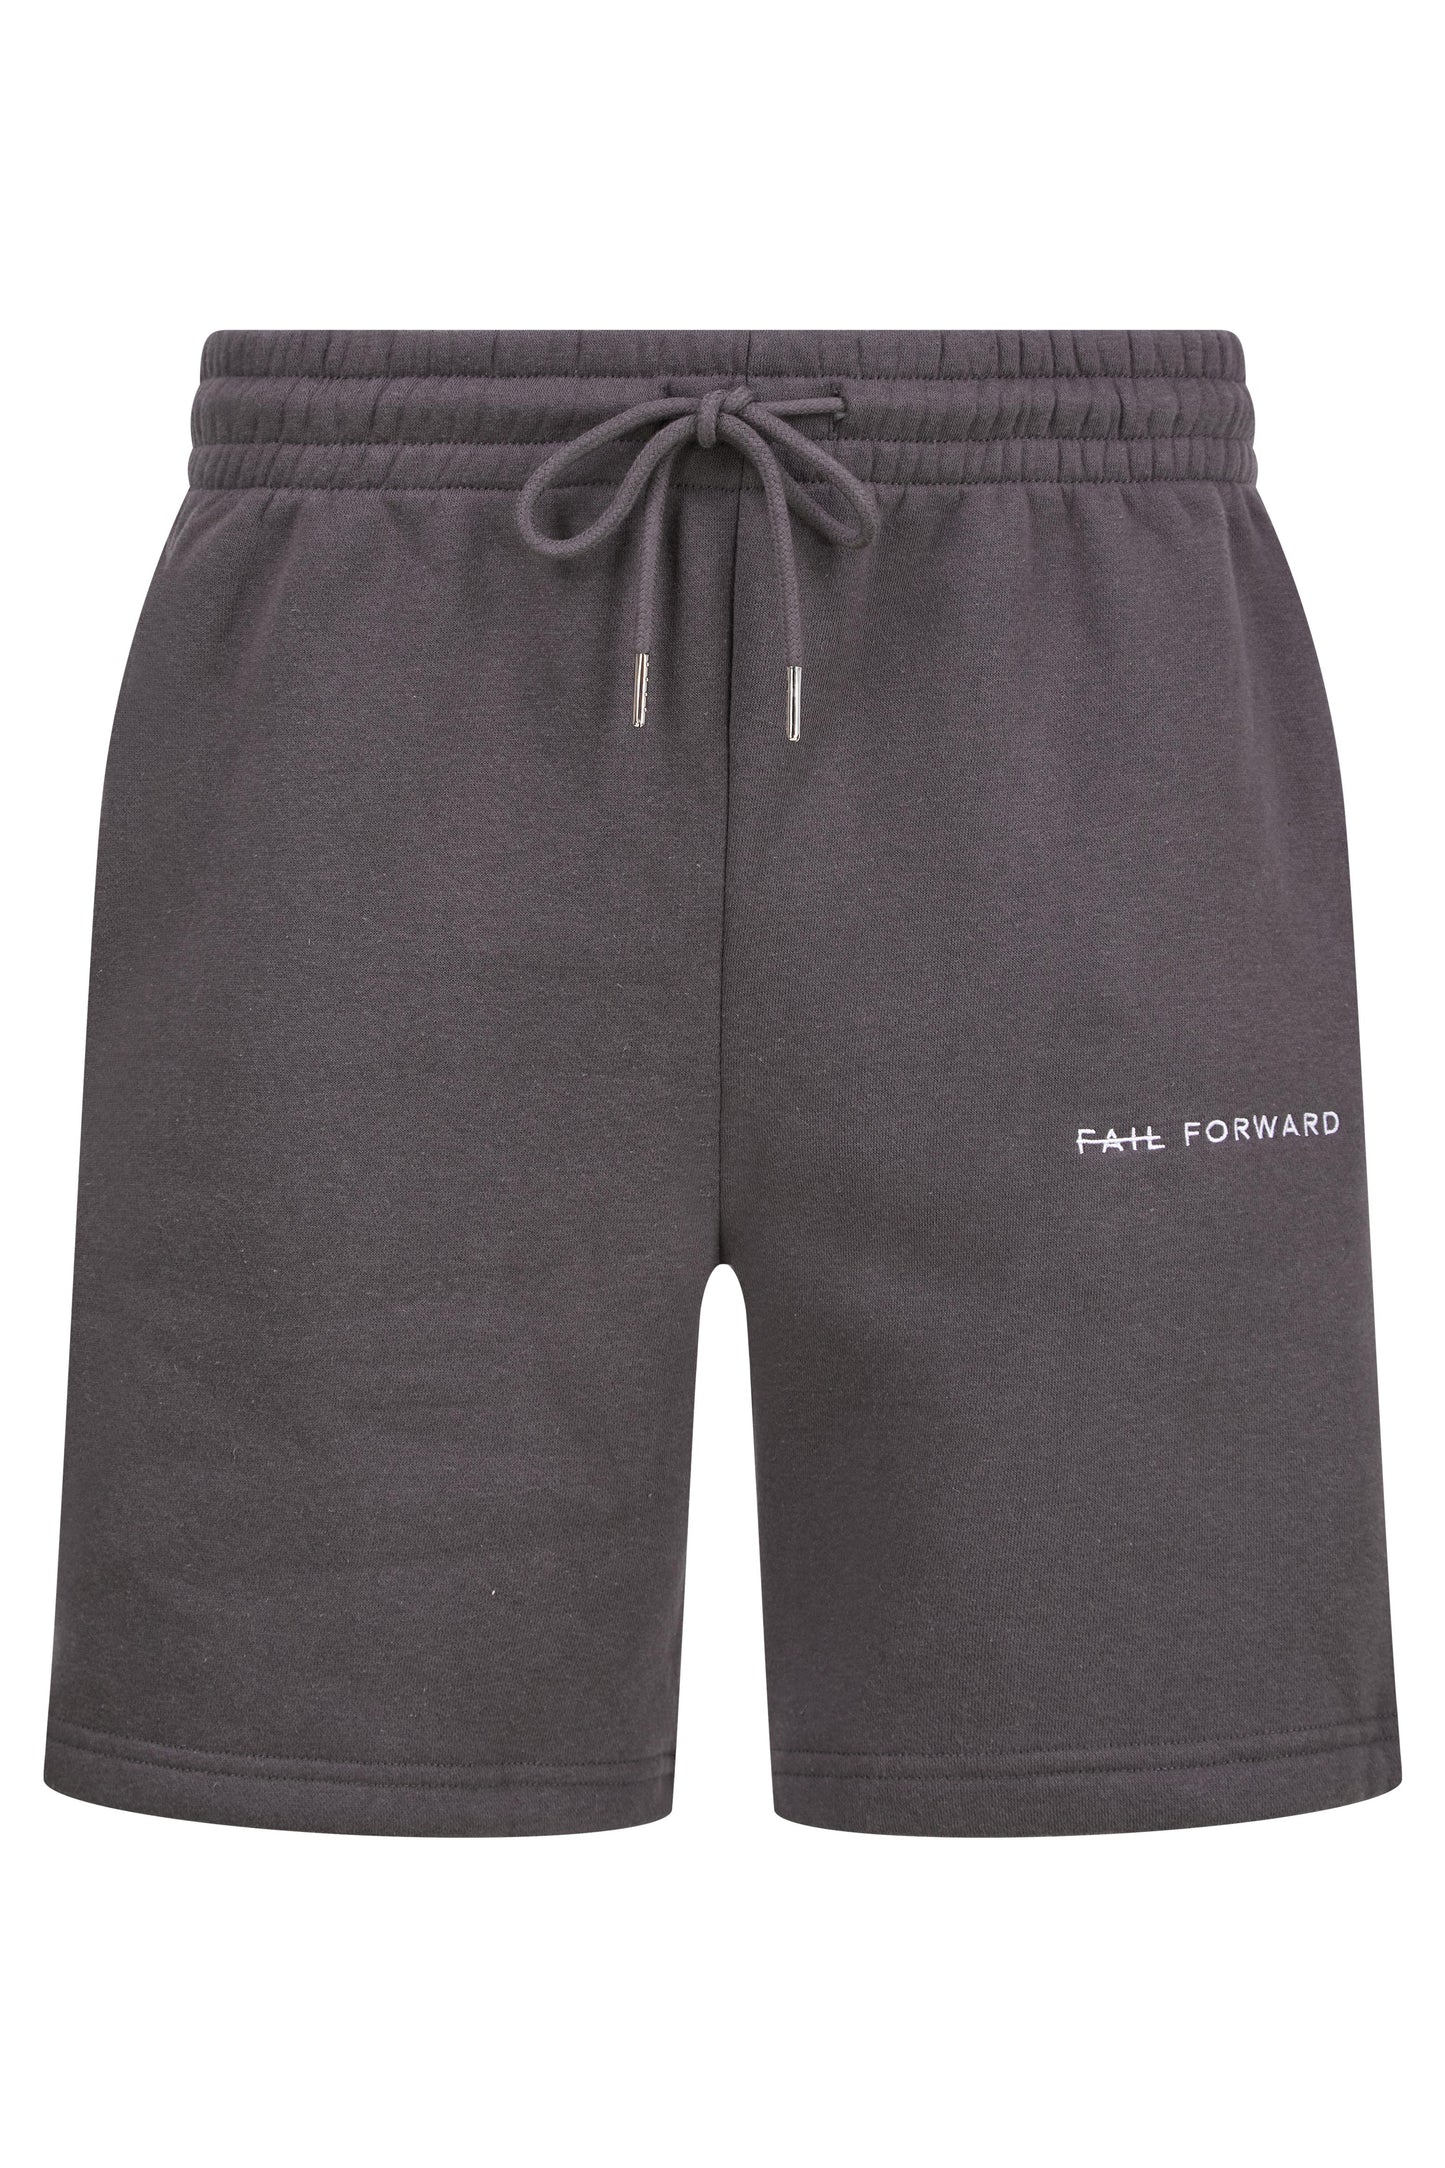 LIMITED EDITION CHARCOAL TRUE SET - SHORTS